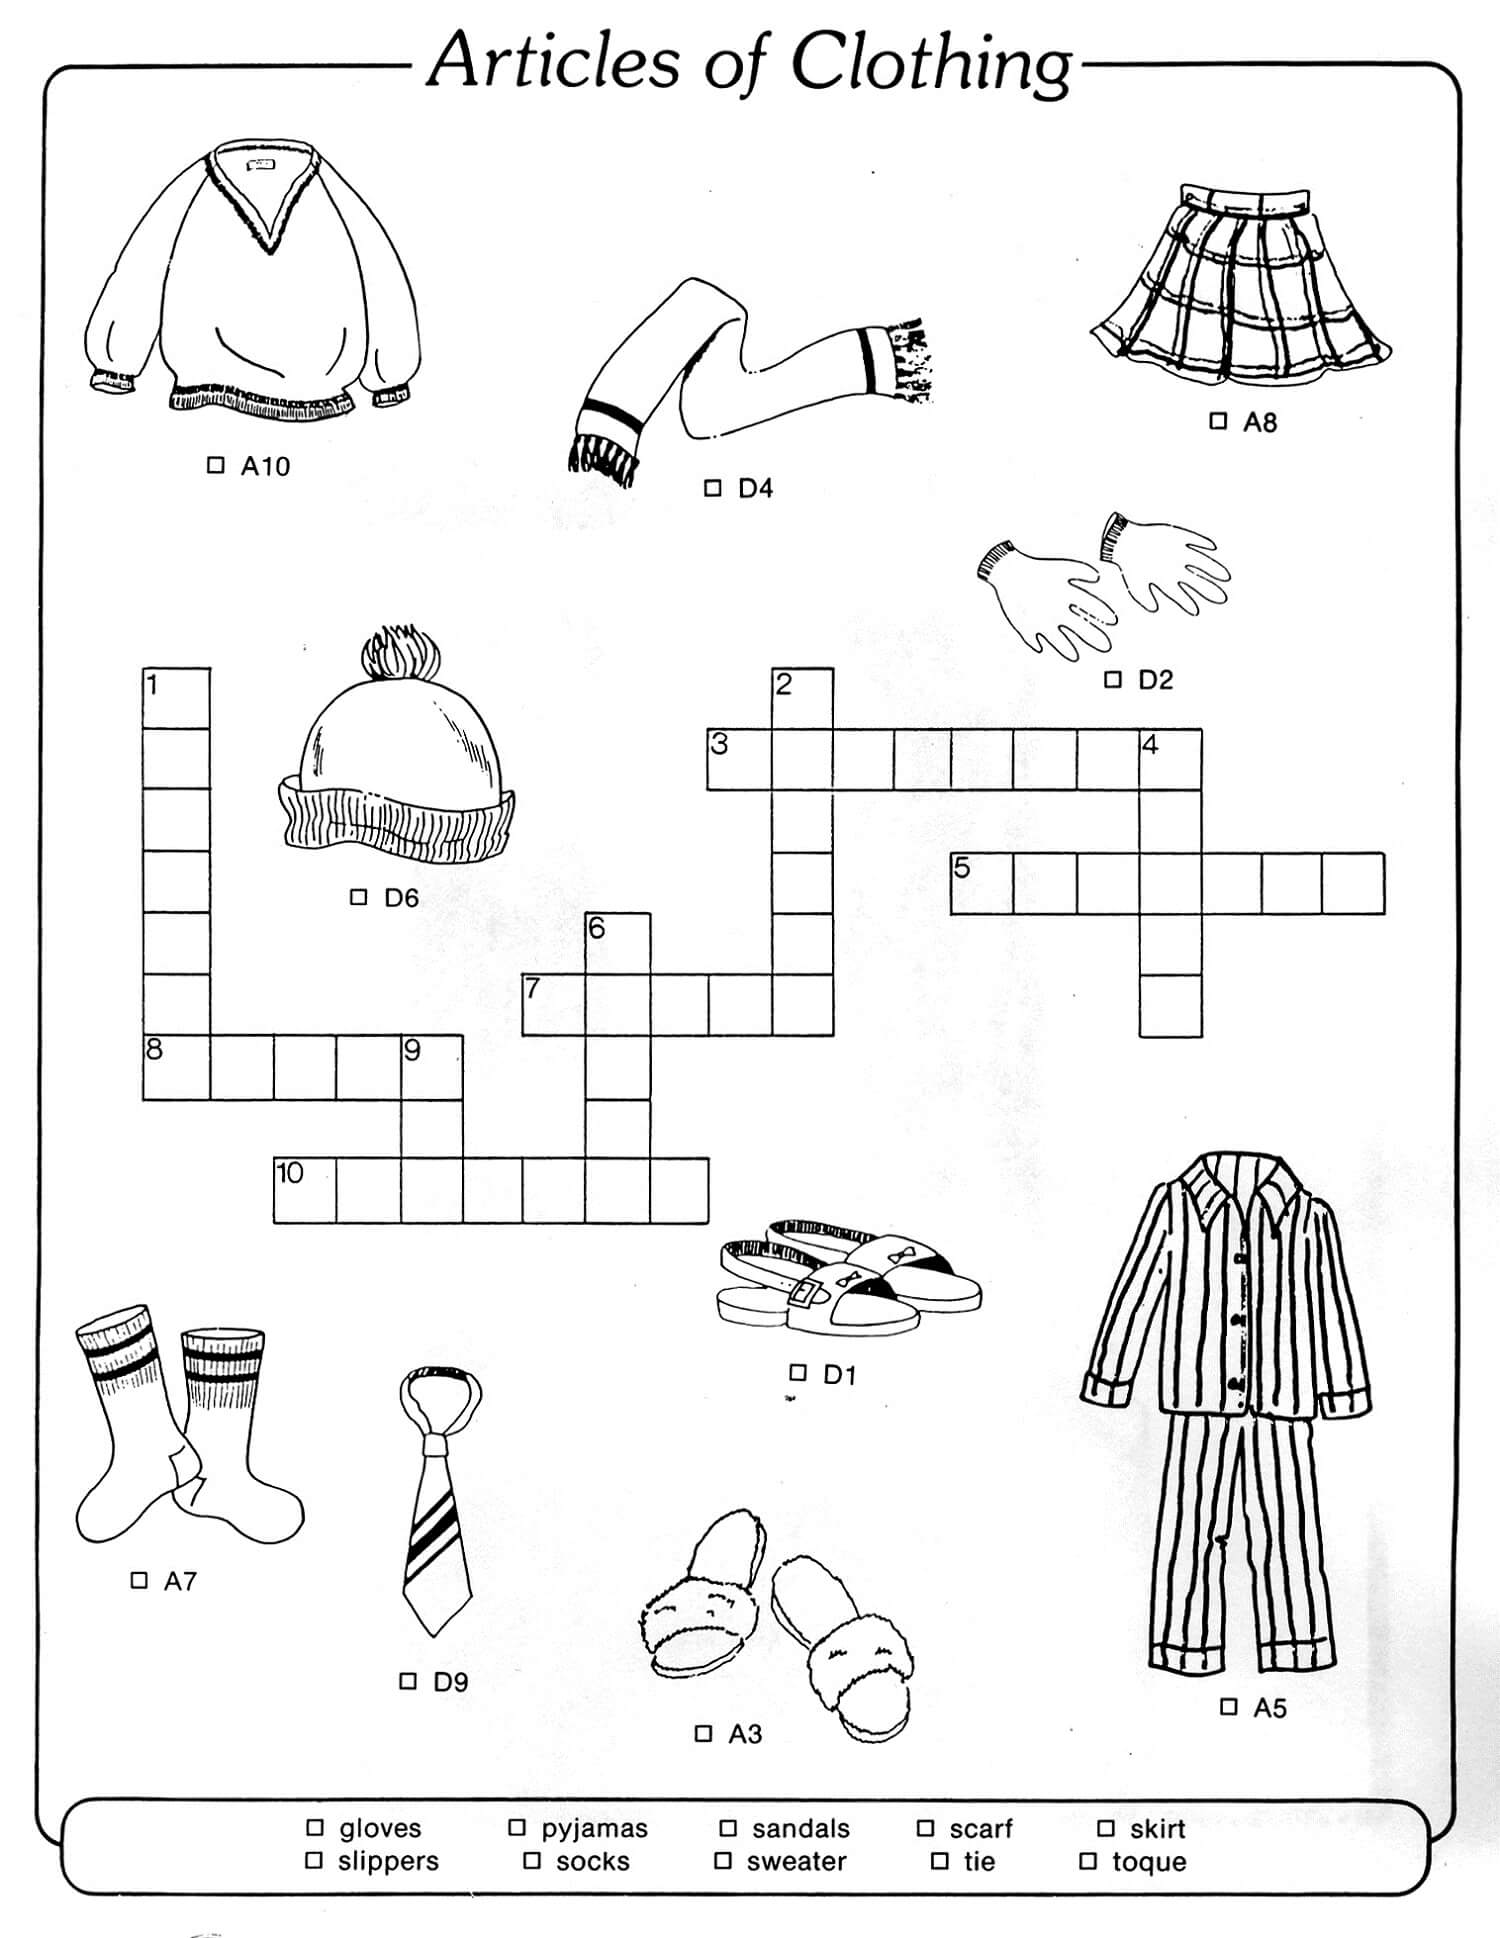 Clothing Crossword Puzzles for Kids